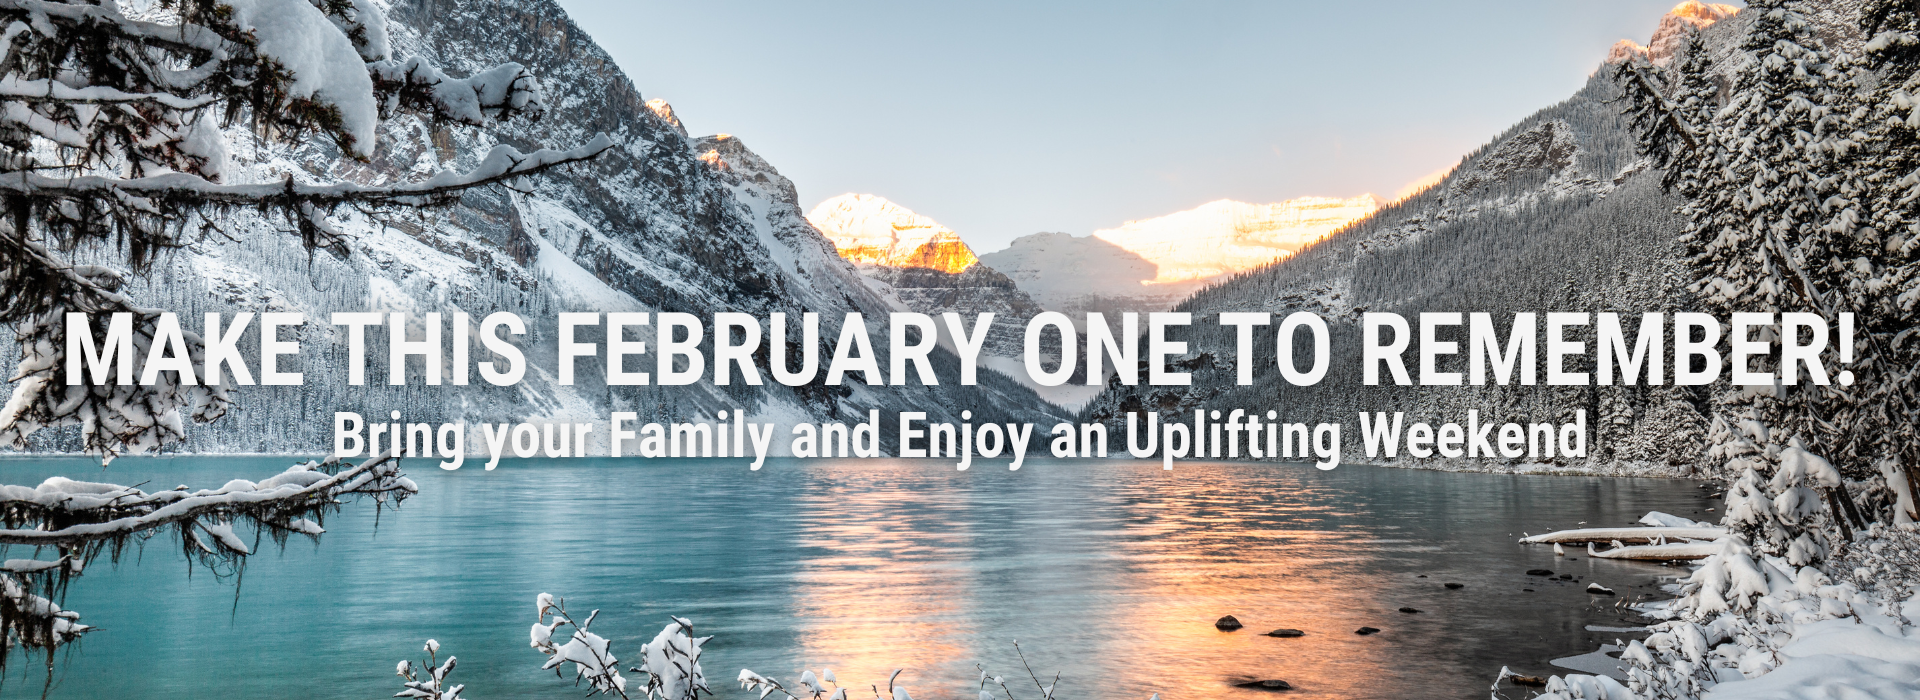 Make this February one to remember. Bring your family and enjoy an uplifting weekend.